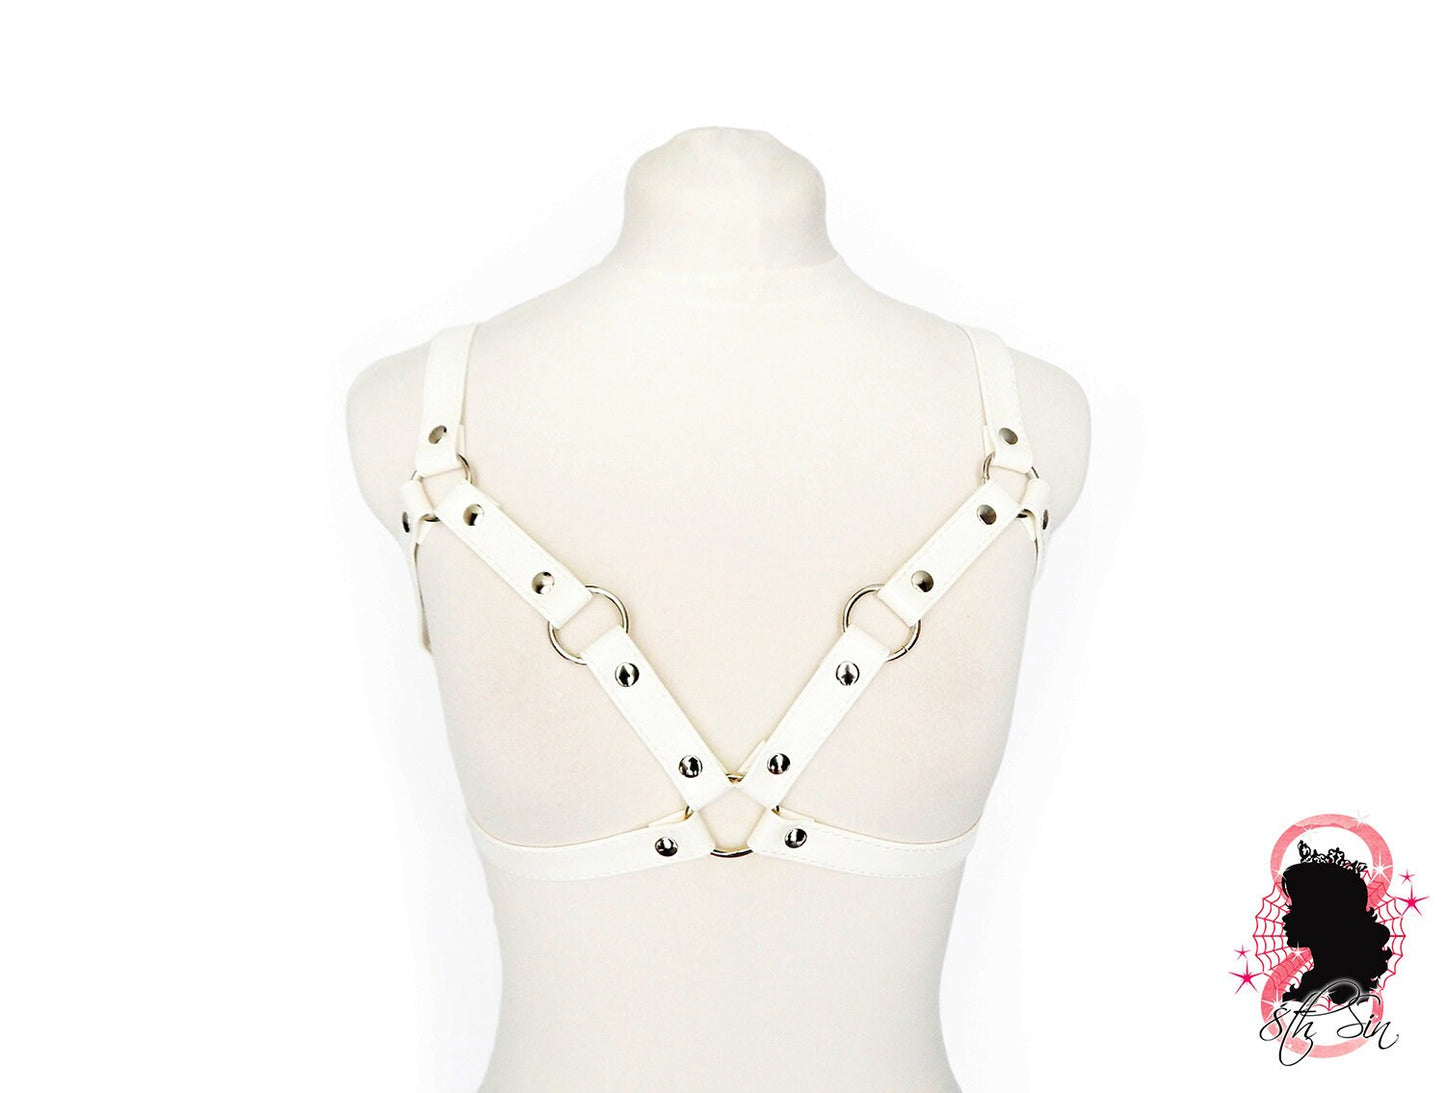 White Vegan Leather Cage and Corset Harness Set